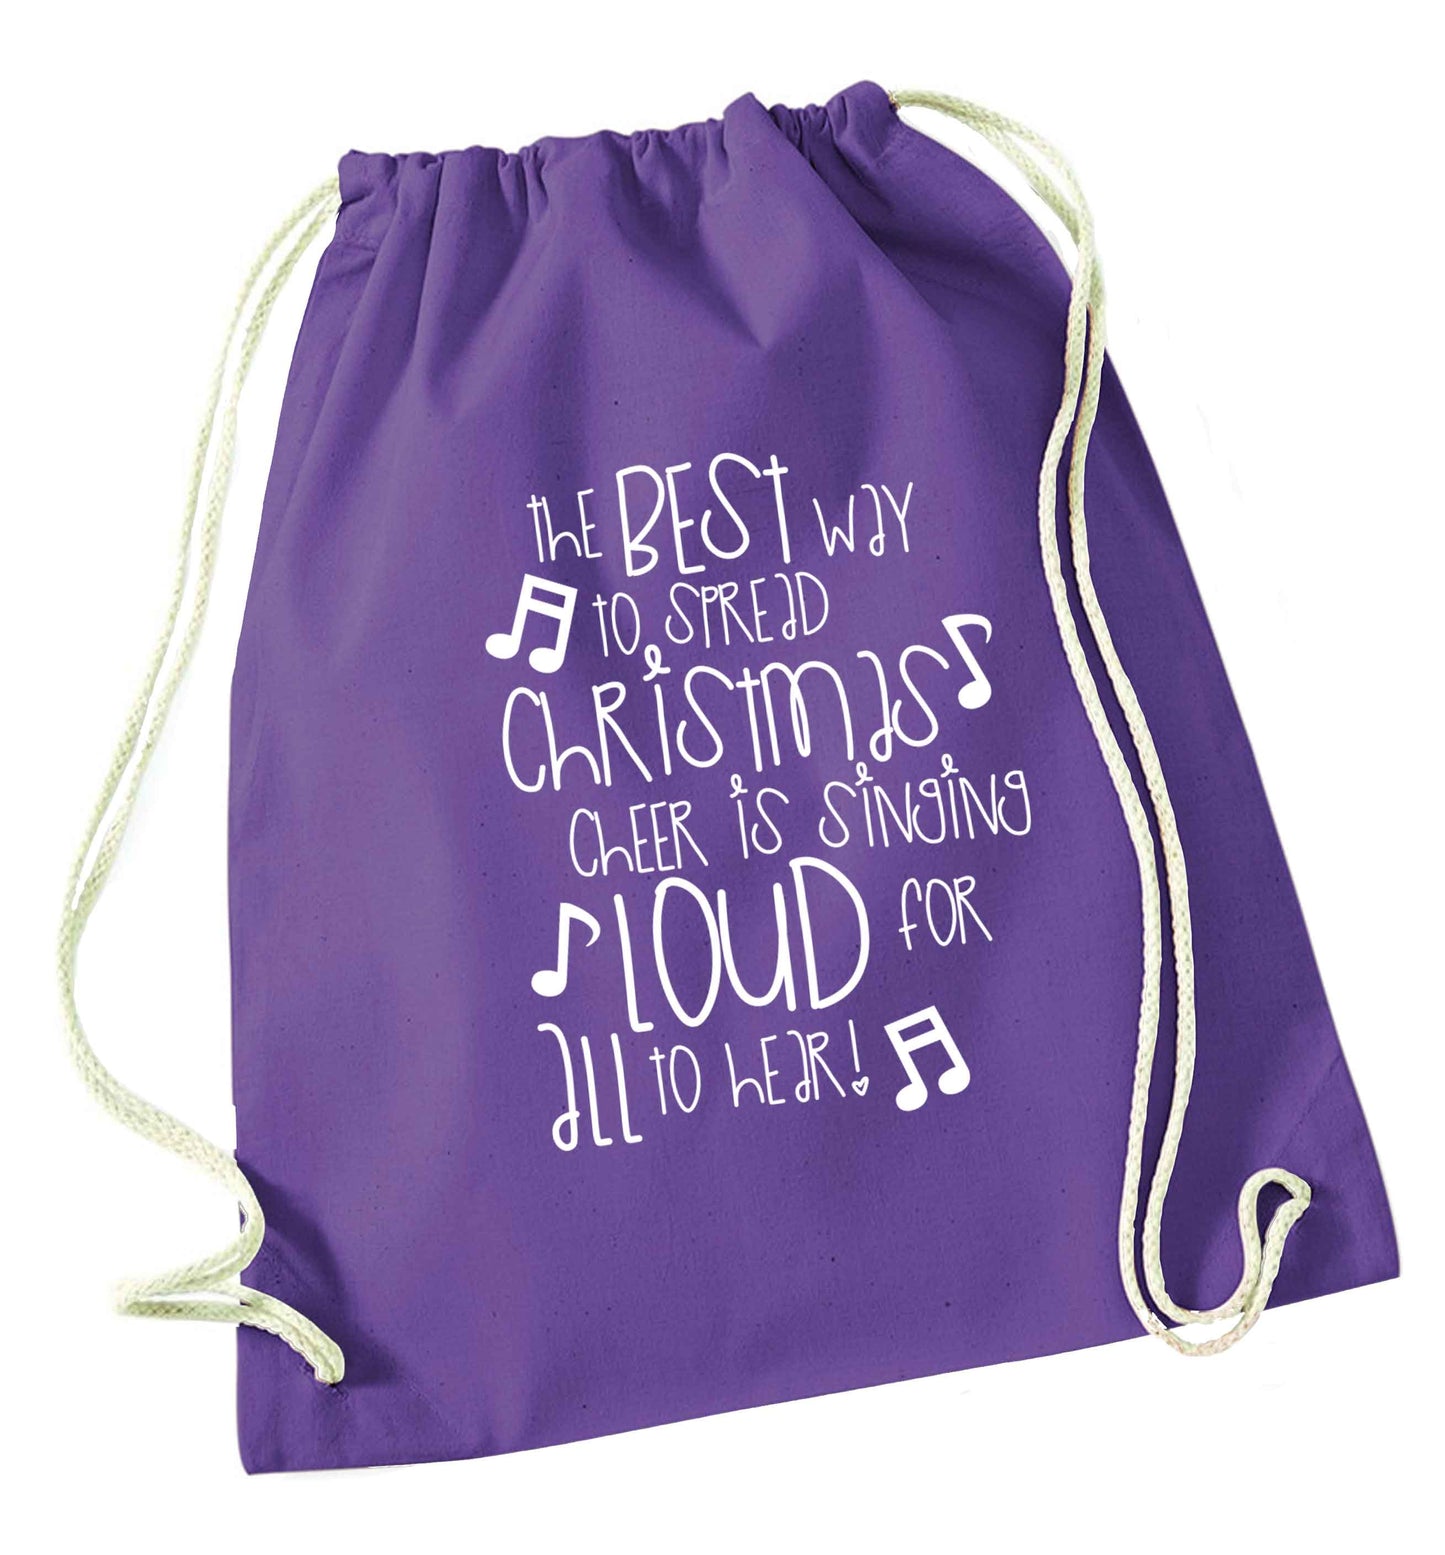 The best way to spread Christmas cheer is singing loud for all to hear purple drawstring bag